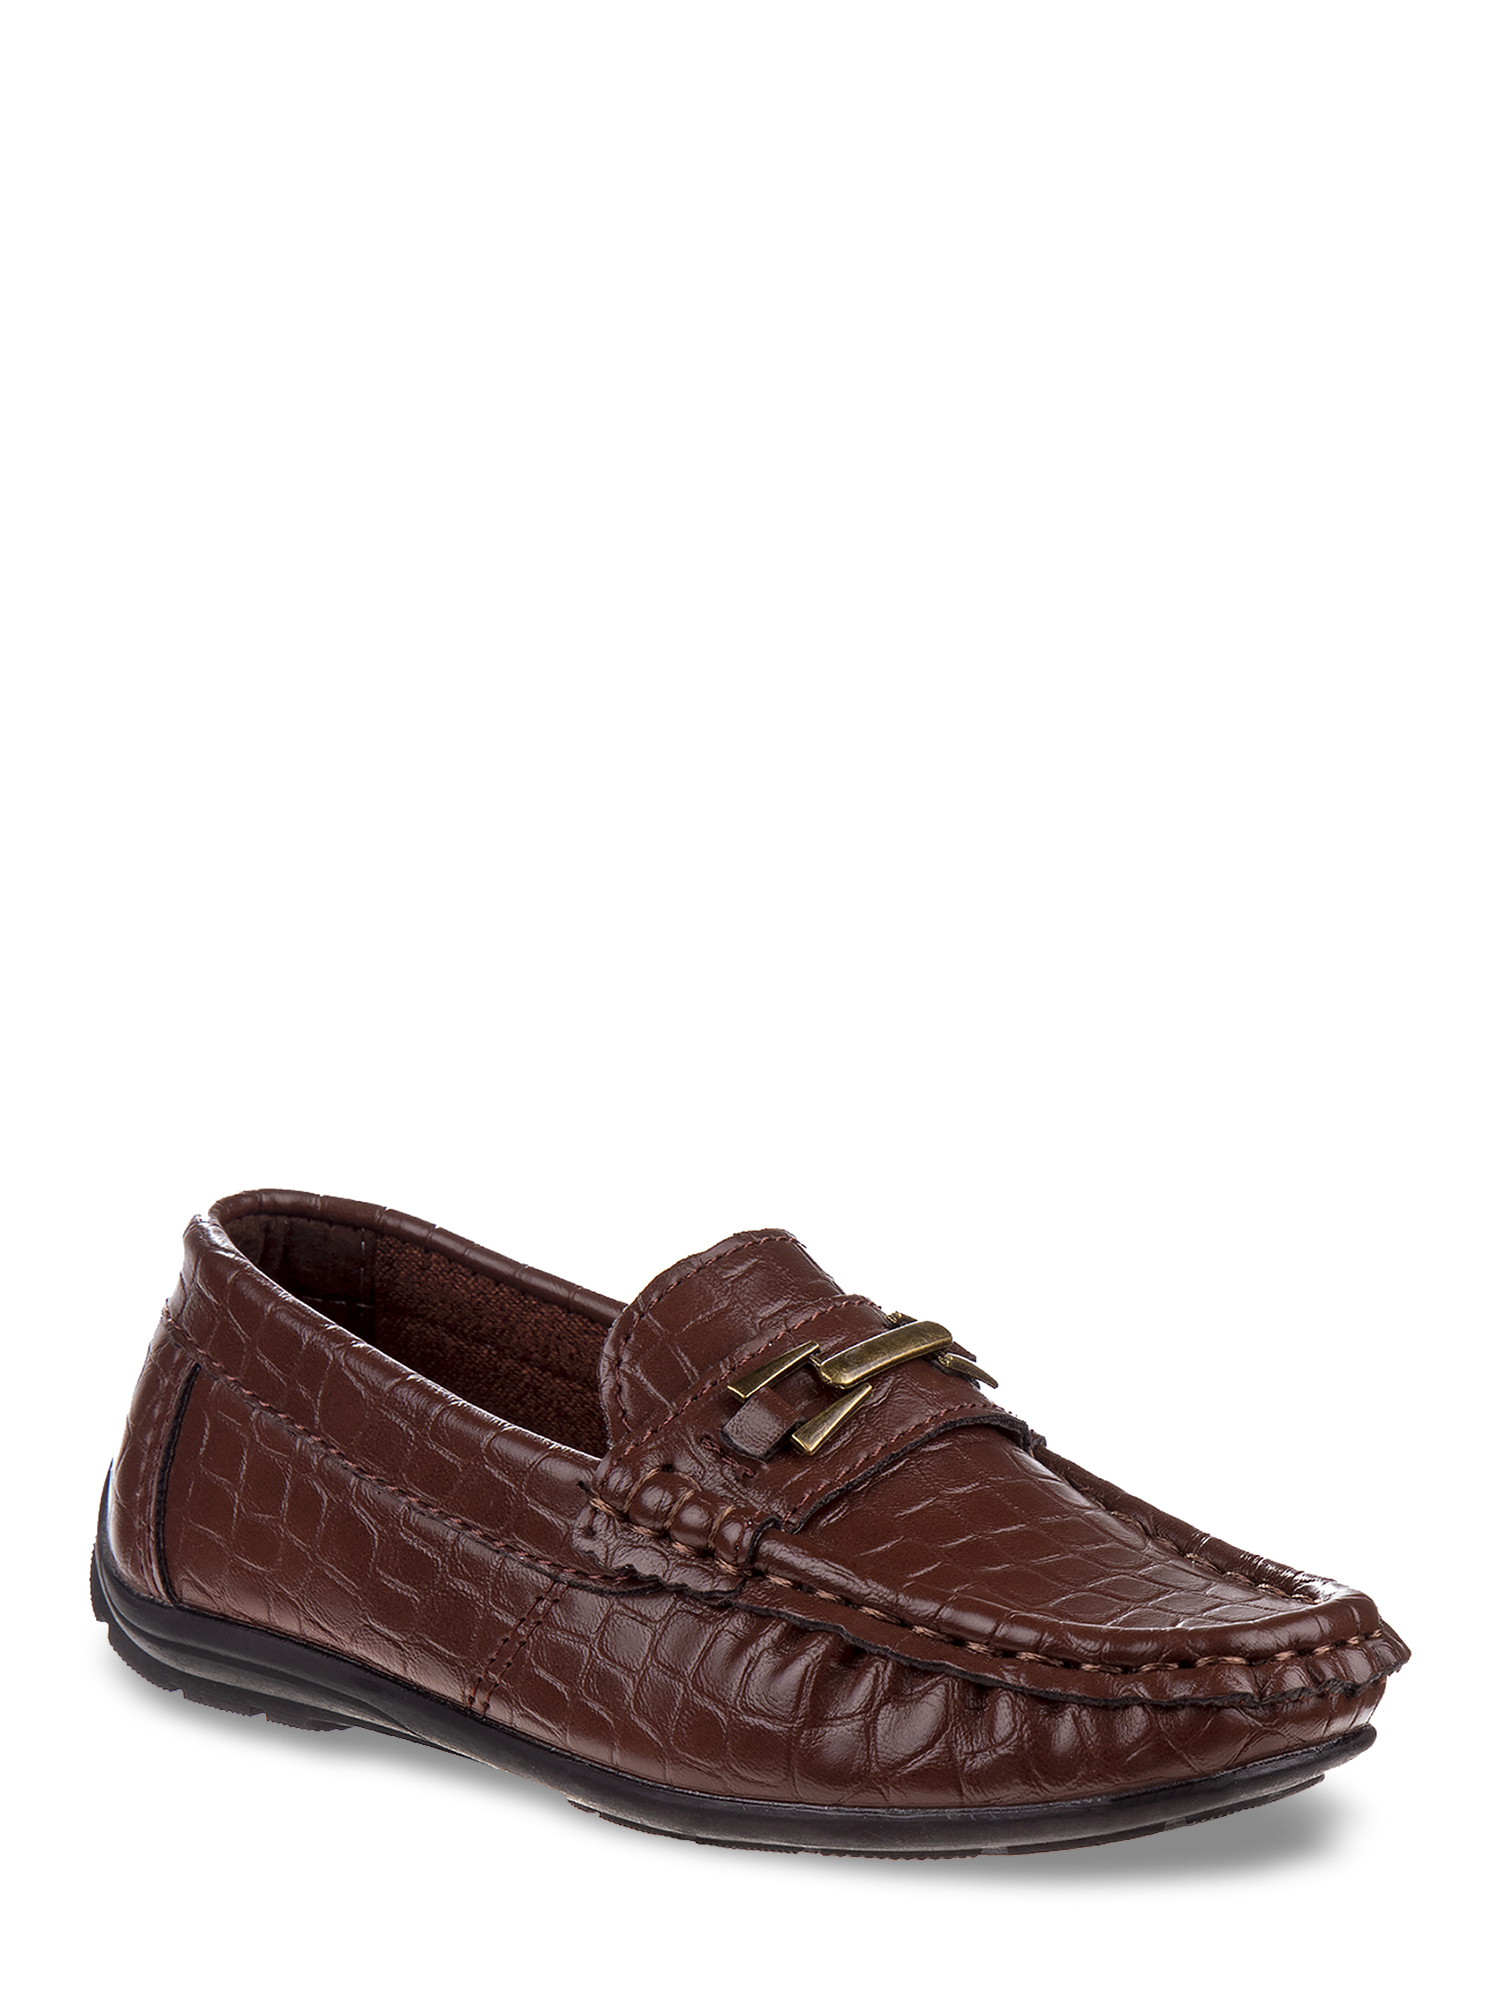 Josmo Boys Loafer with Metal Accent - image 1 of 1